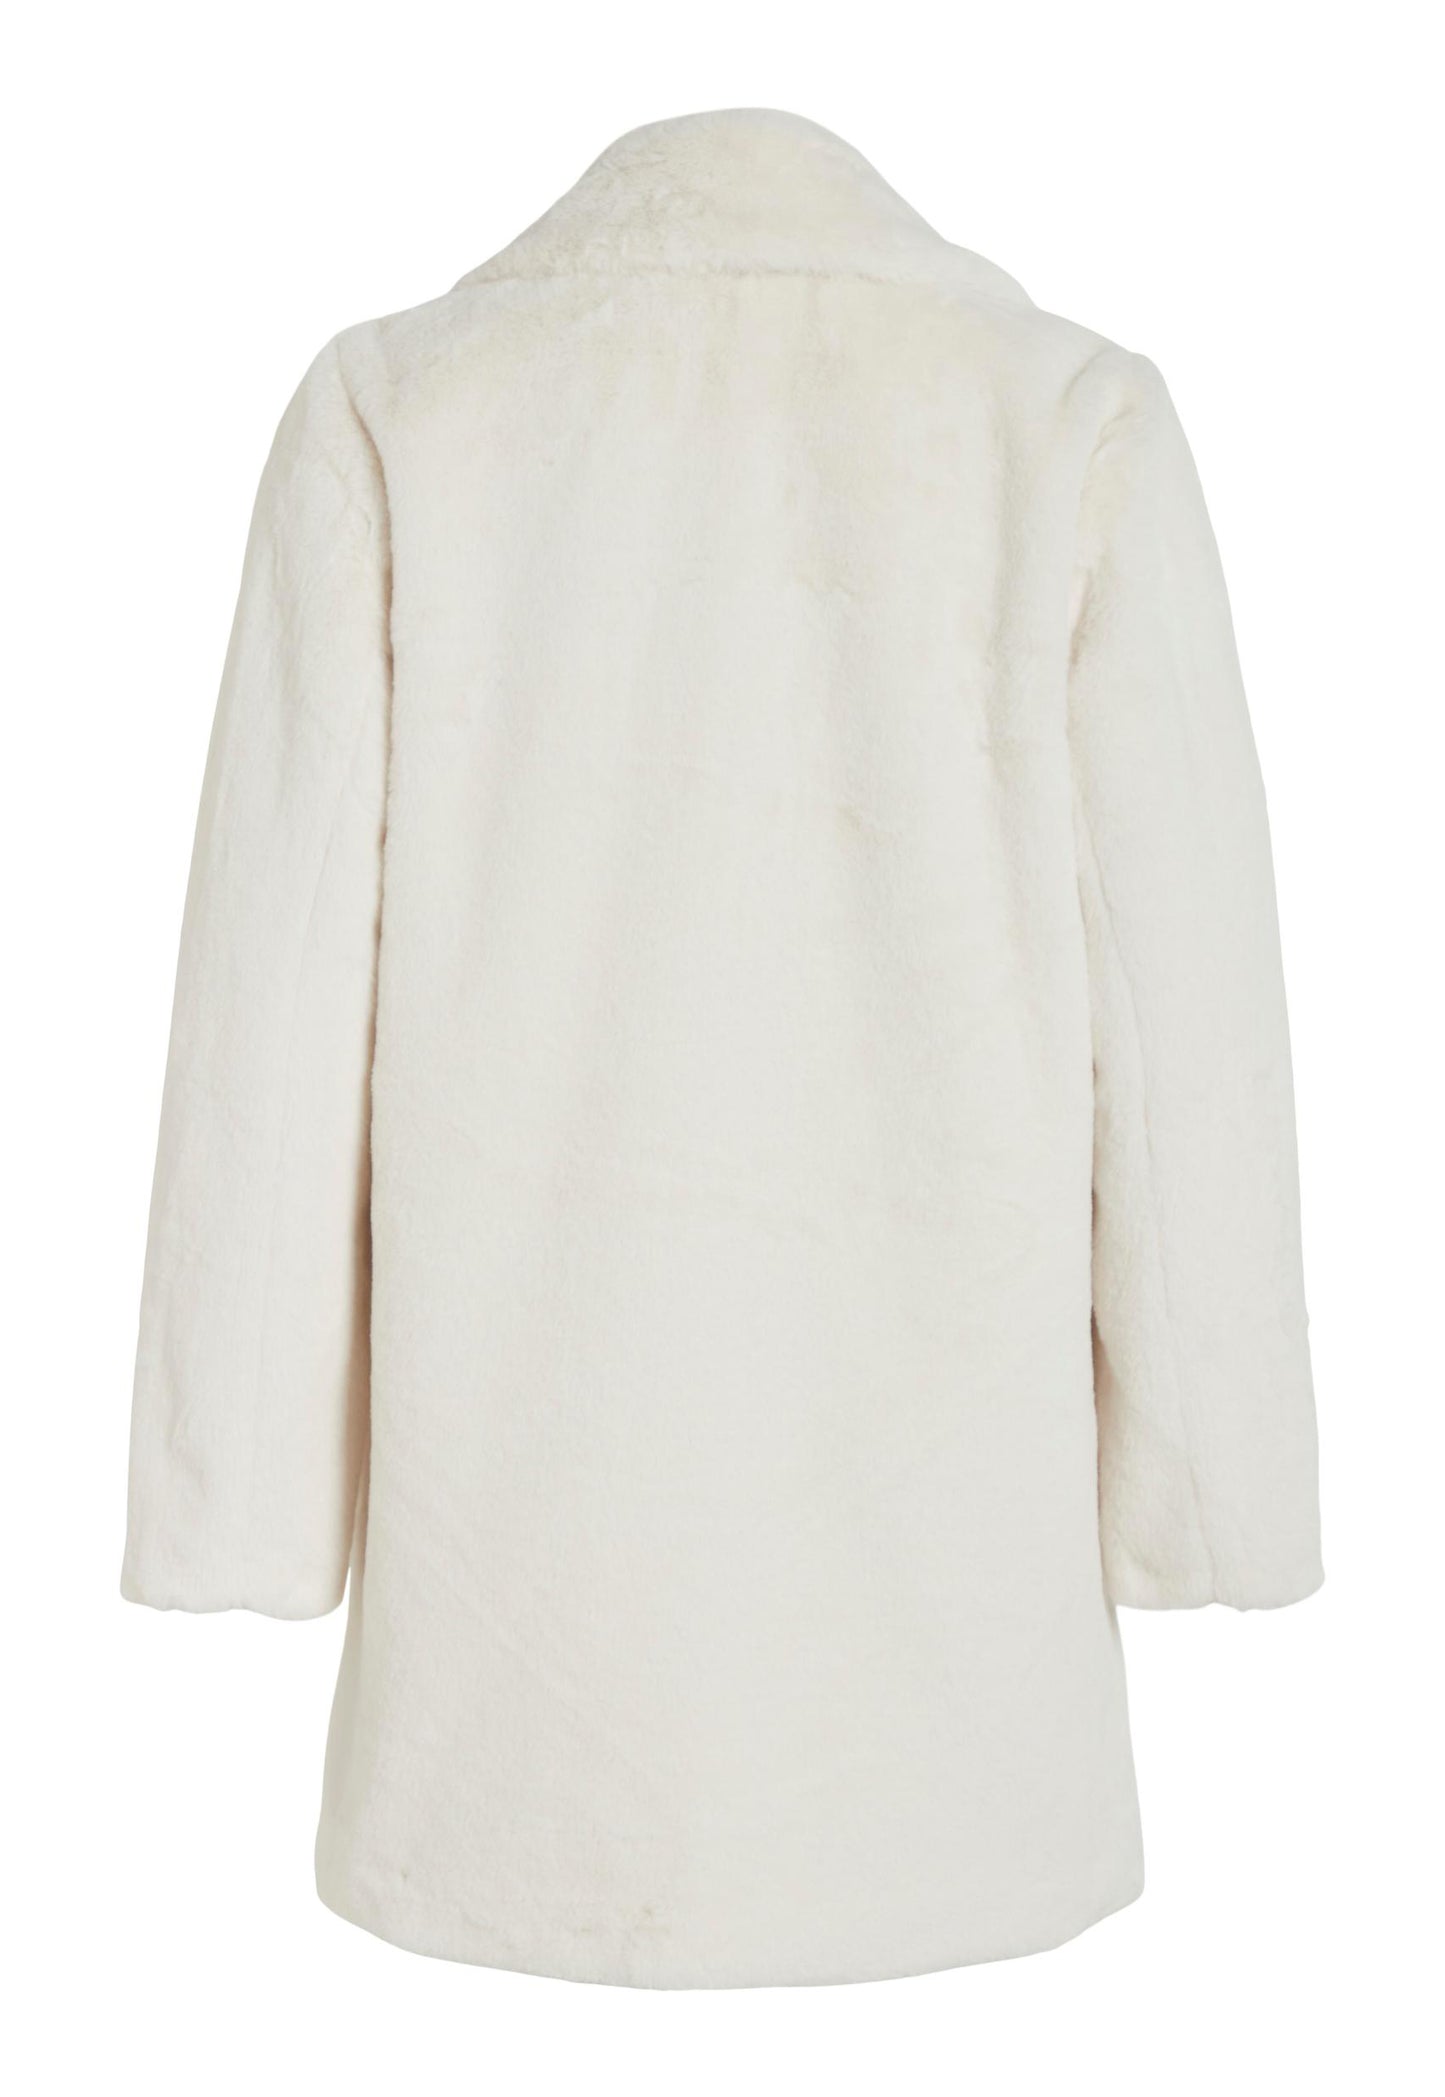 
                  
                    VILA New Ebba Vintage Style Faux Fur Midi Coat with Collar in Soft Cream - One Nation Clothing
                  
                